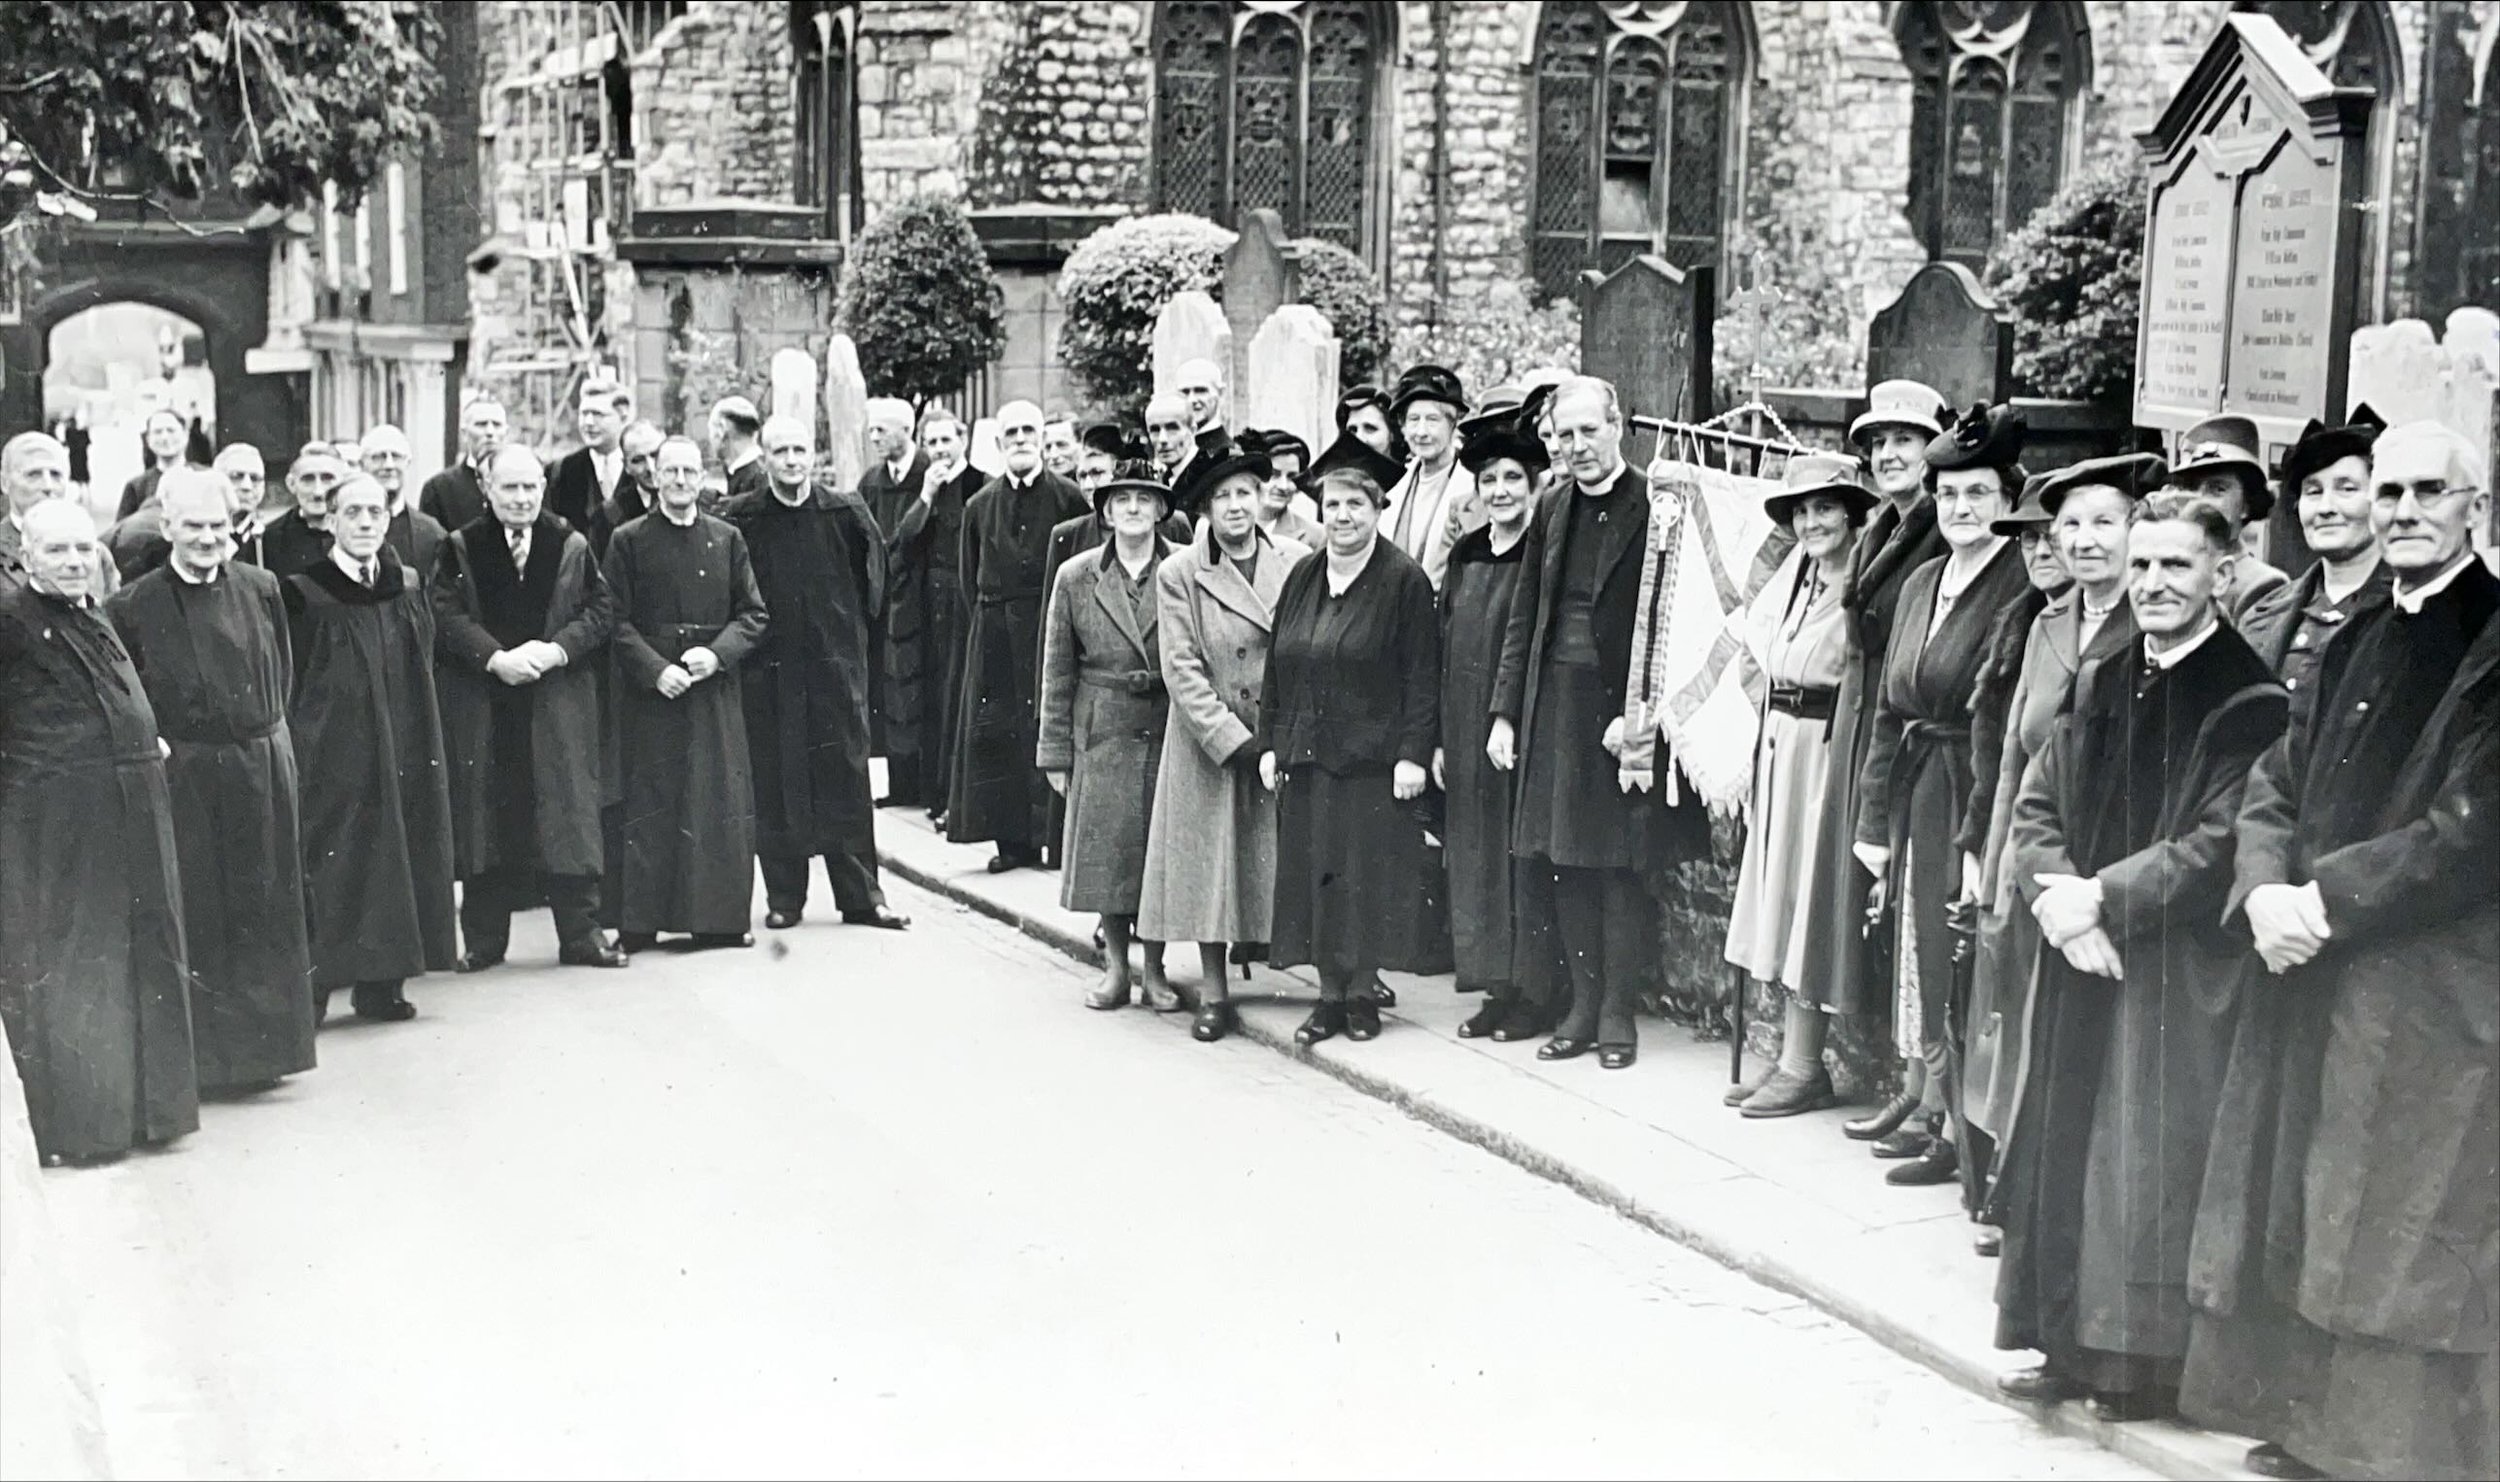 Diocesan Guild of Vergers after Evensong, October 1950